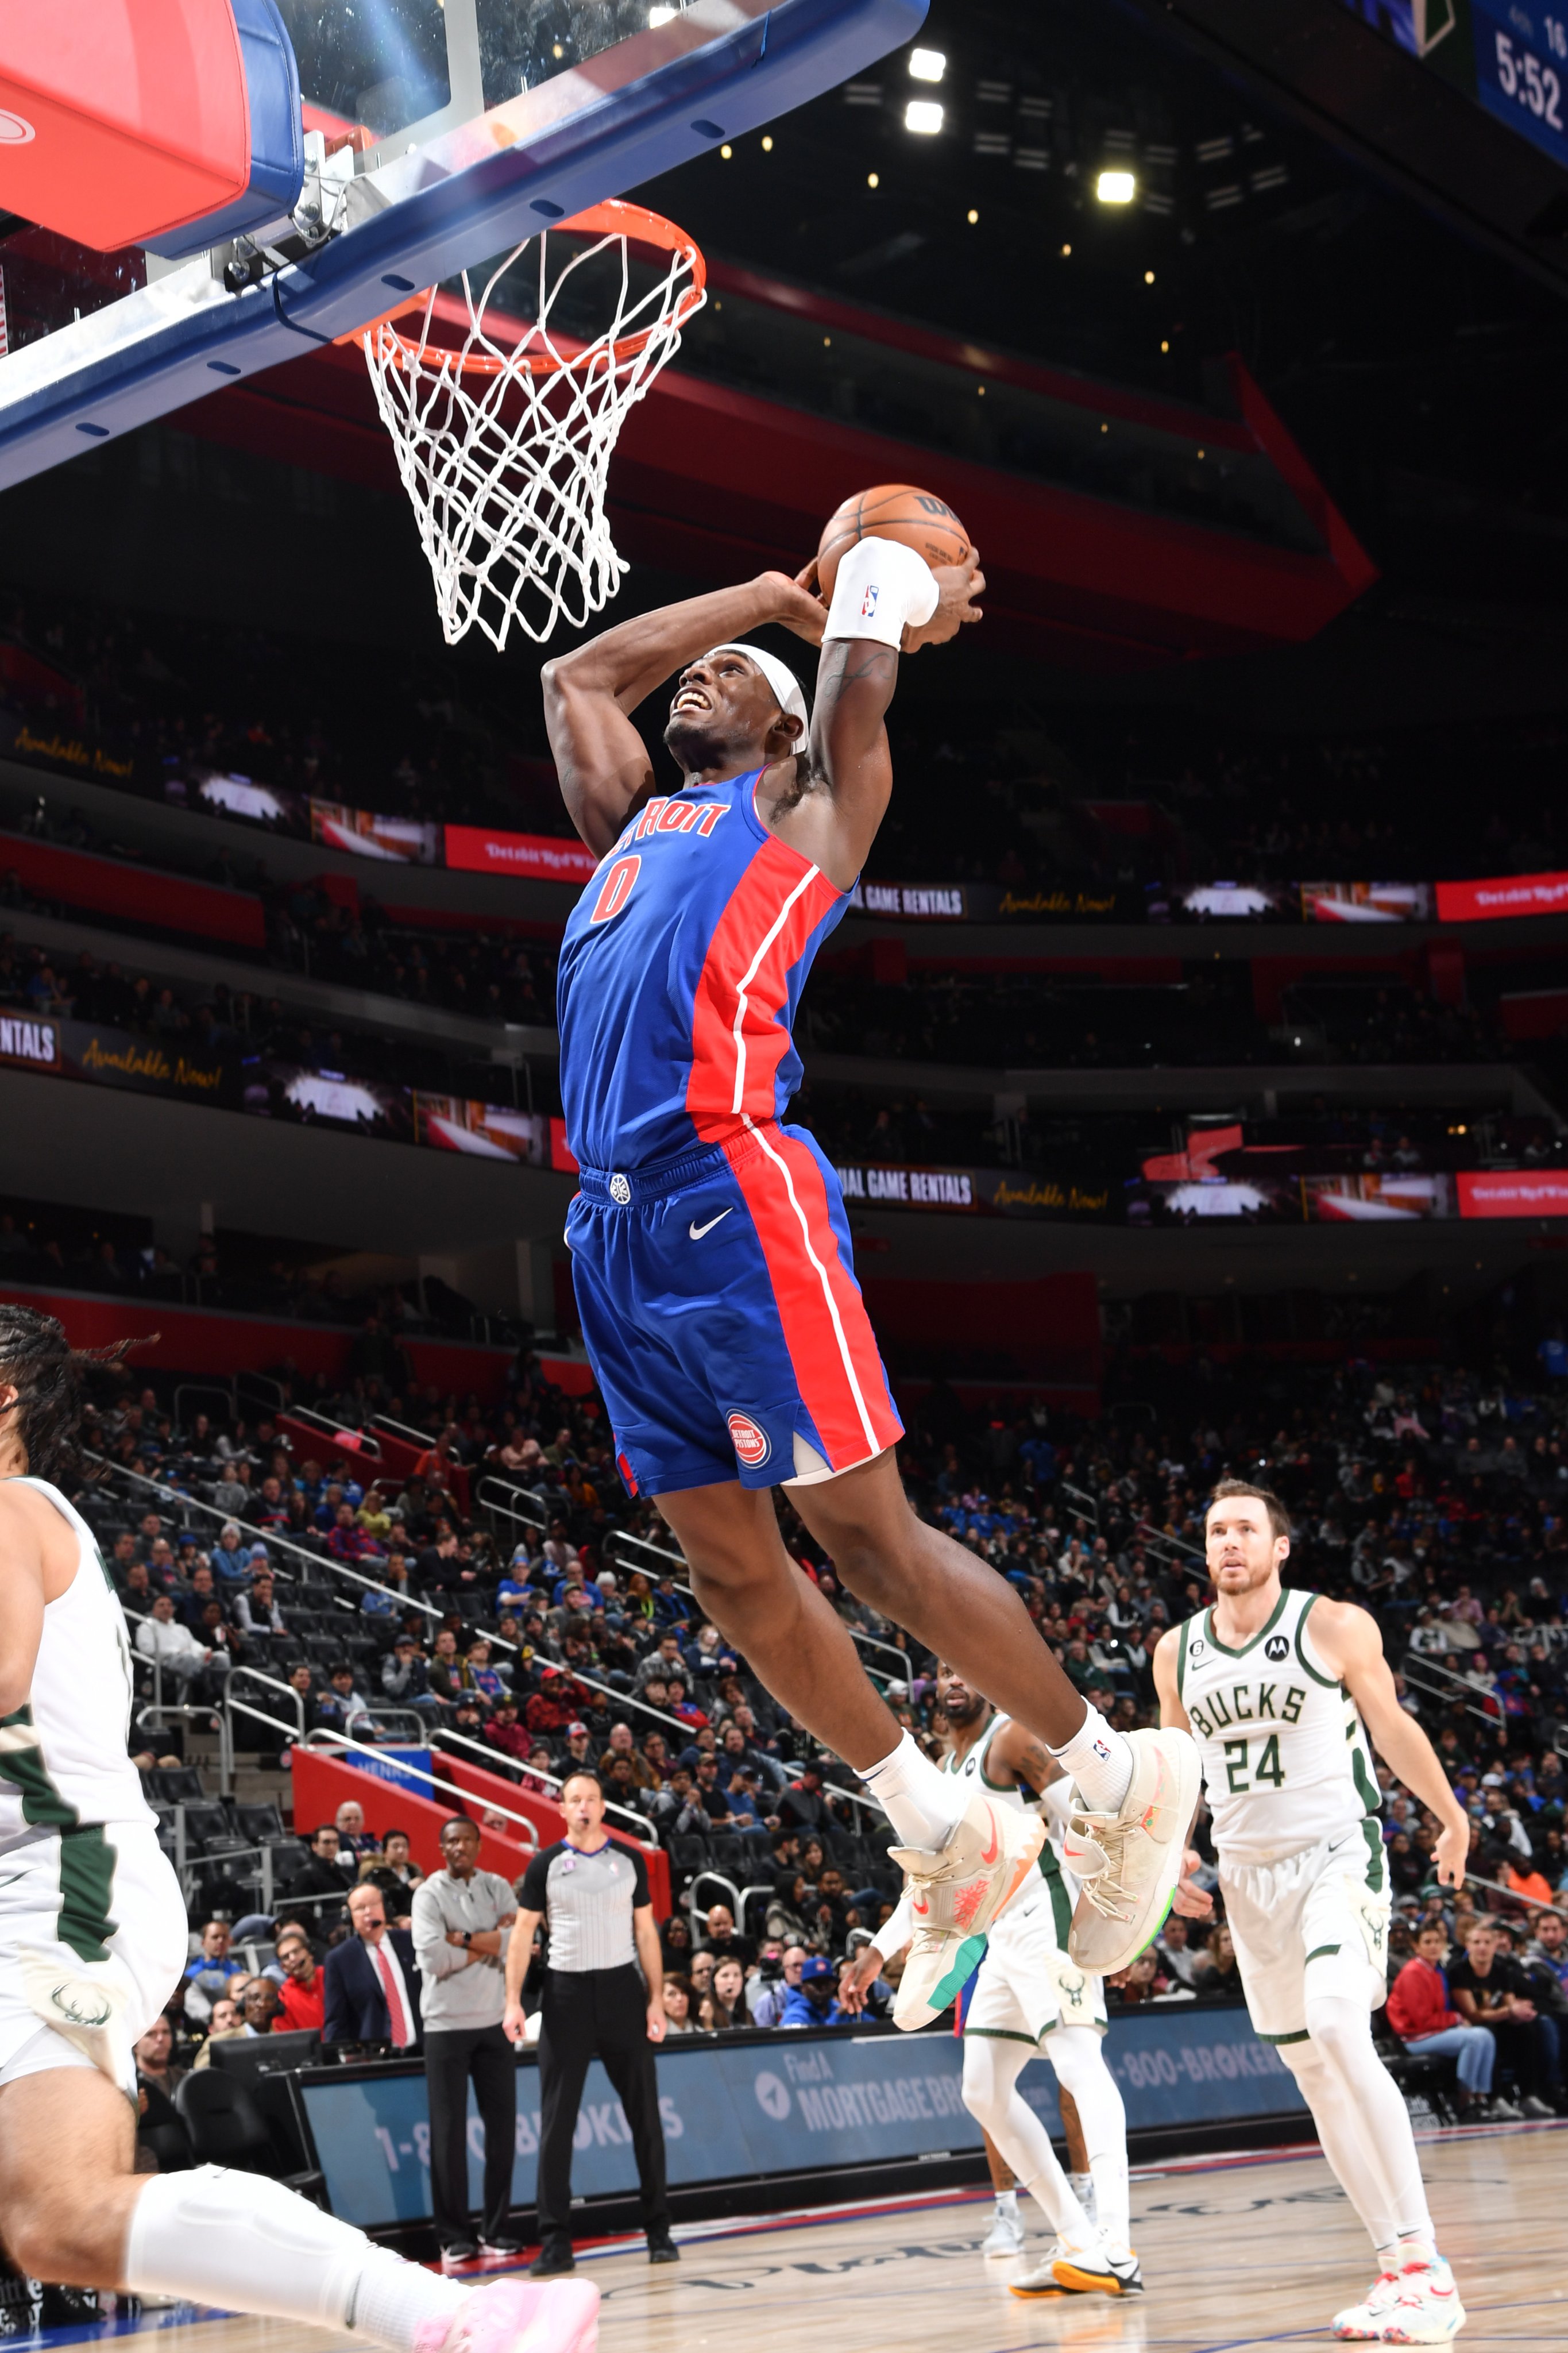 Pistons PR on X: Jalen Duren posted a career-high 23 points with 15  rebounds vs. MIL for his rookie-leading 10th double-double of the season.  Duren (19y, 66d) is the youngest player in